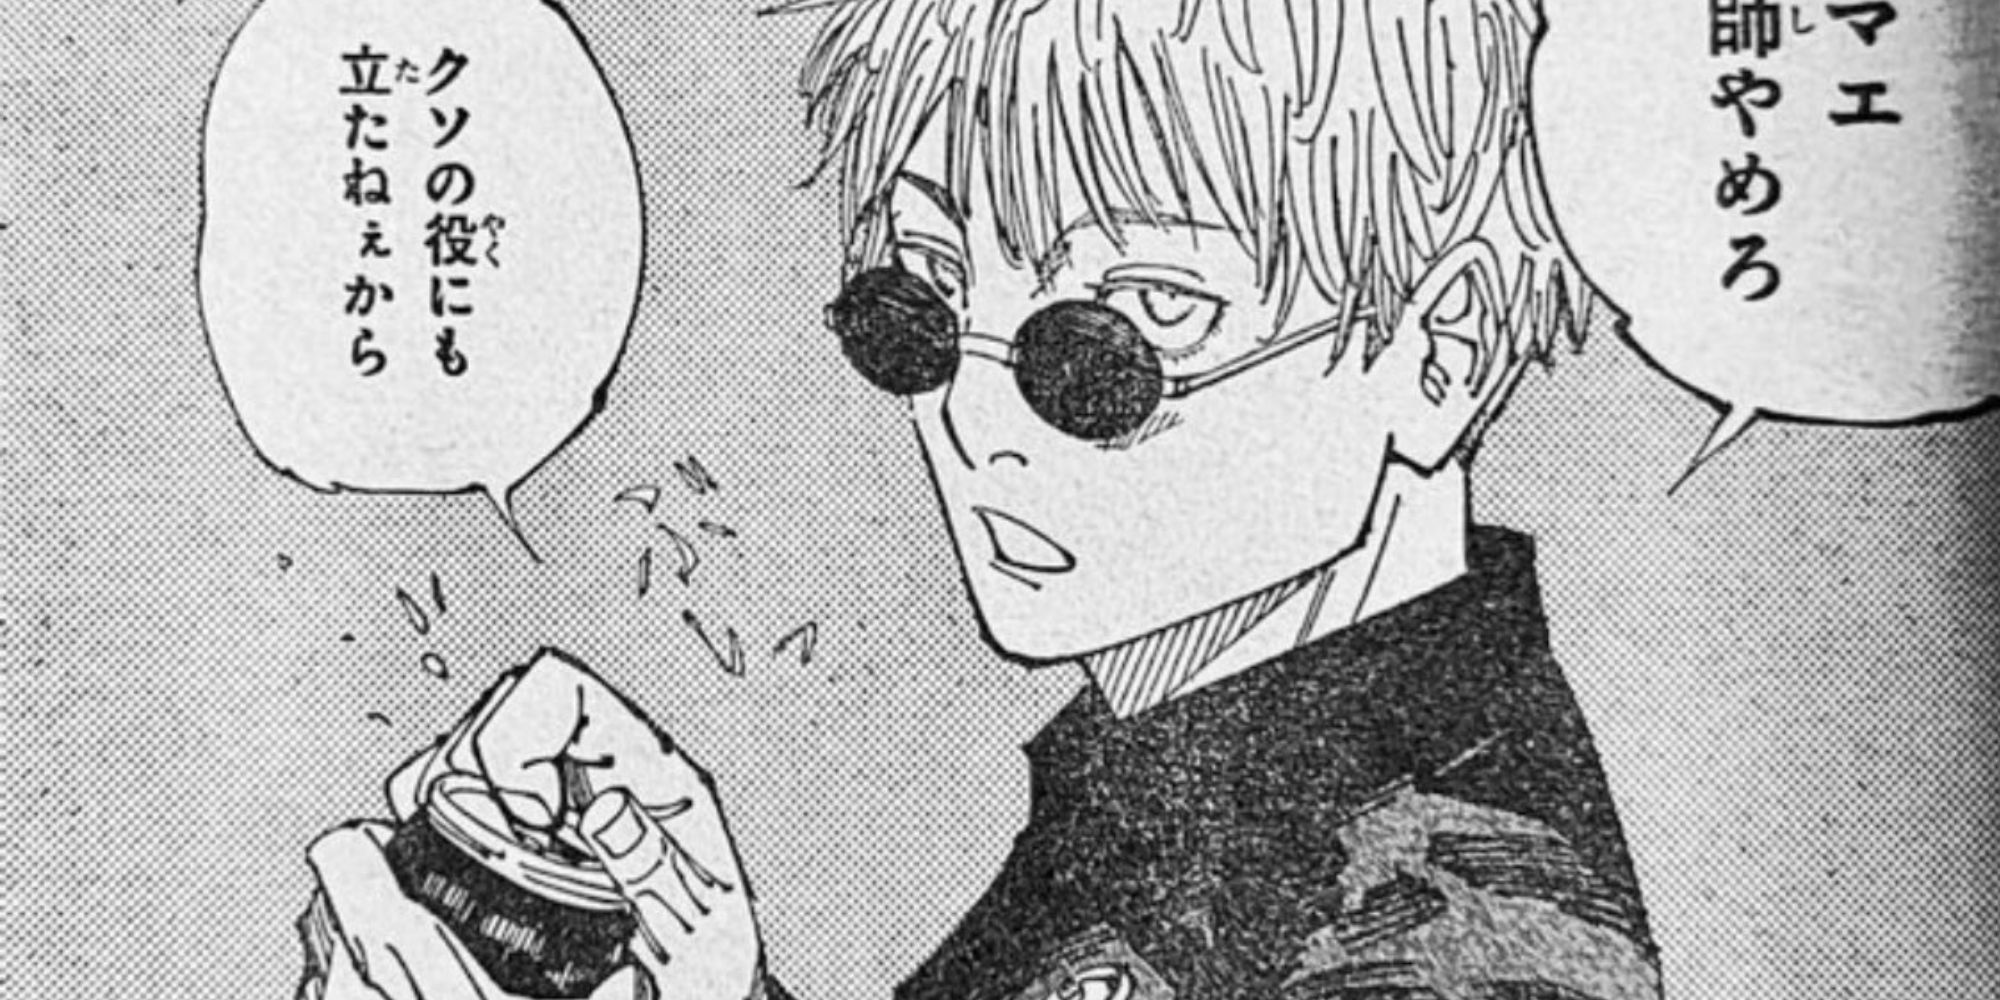 Jujutsu Kaisen chapter 211 release date time and spoilers